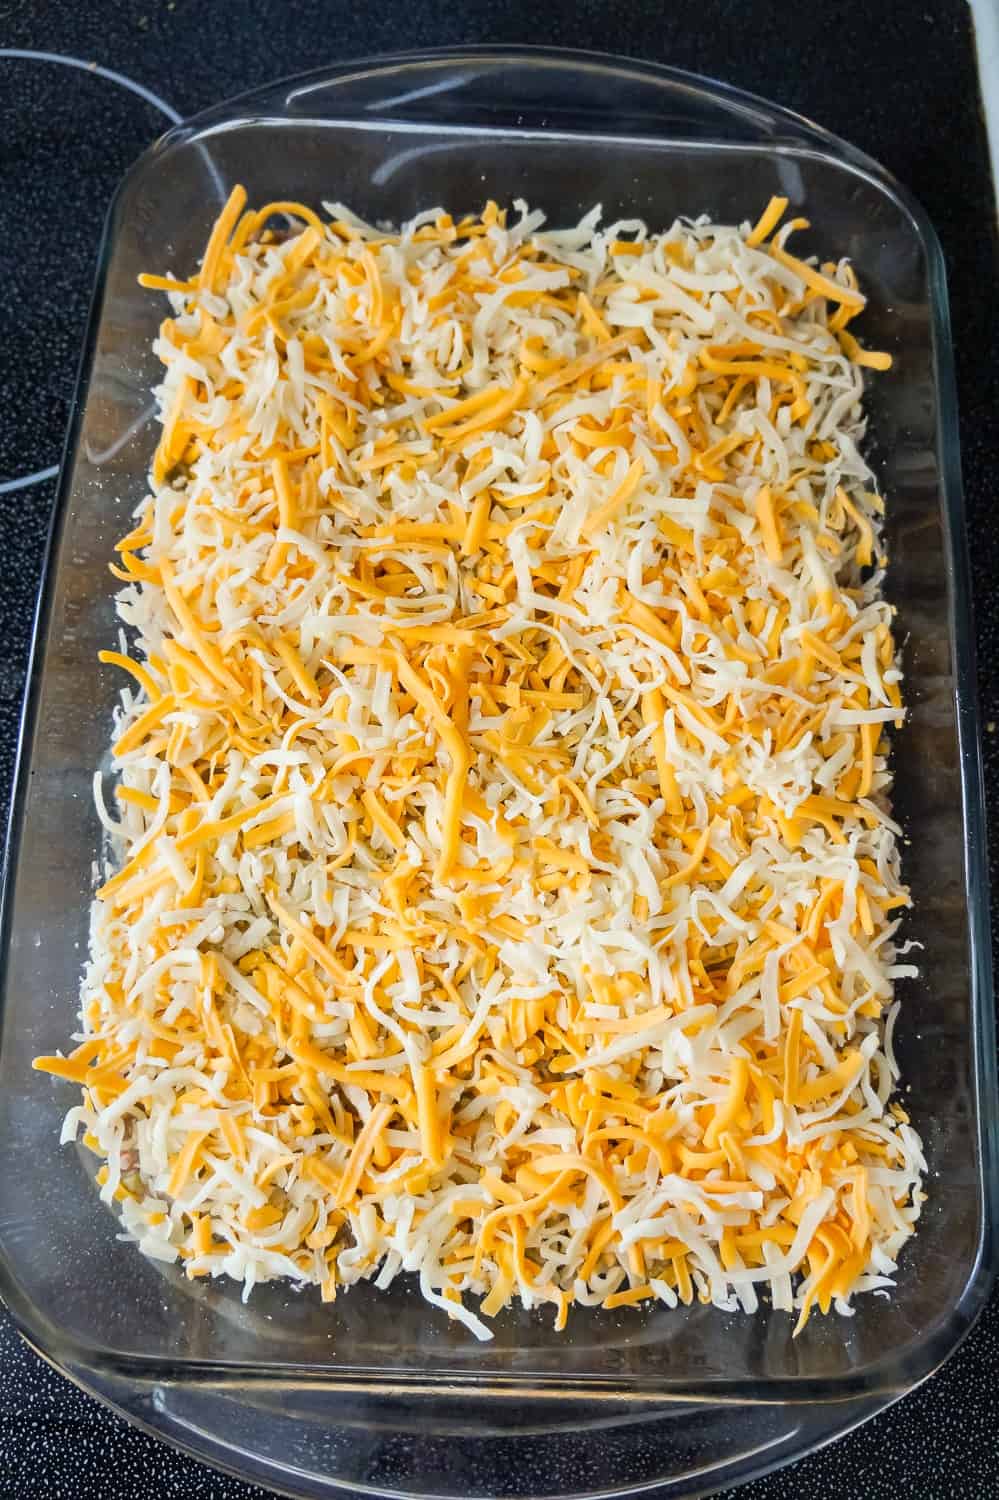 shredded cheddar and mozzarella on top of ground beef casserole in a baking dish